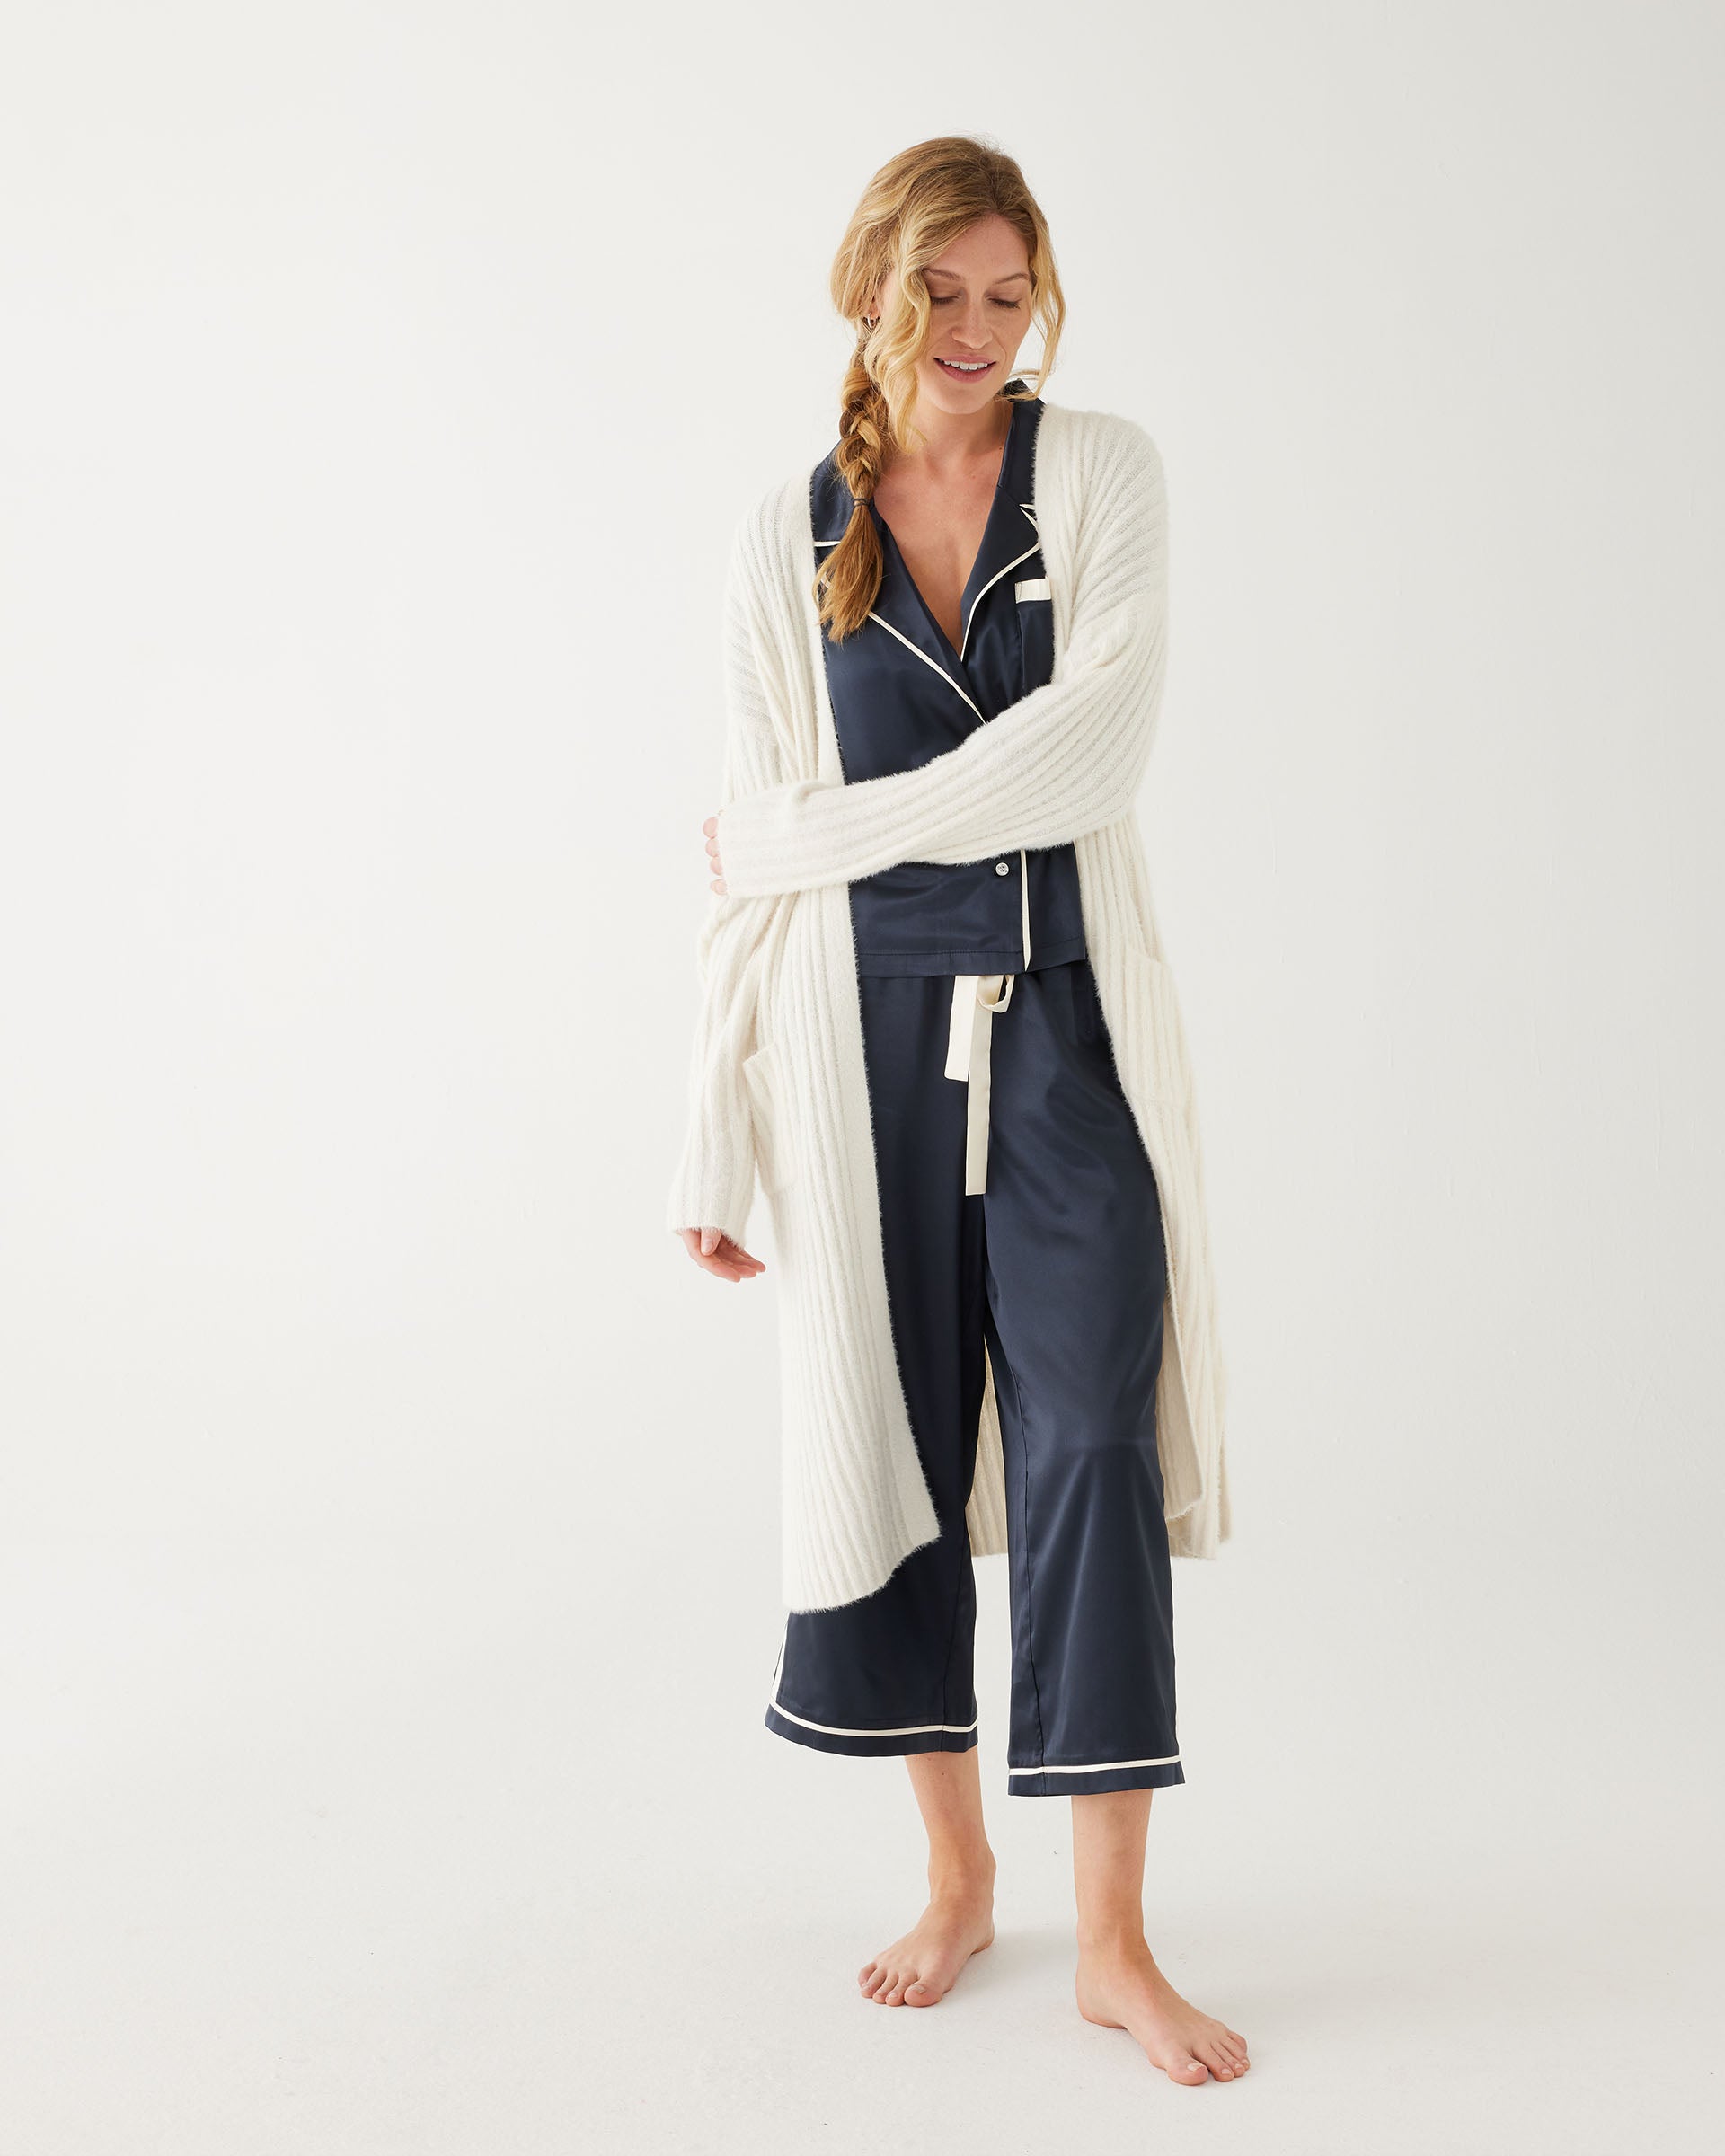 female wearing Mersea sapphire satin sailor pajama set and white robe standing against white background